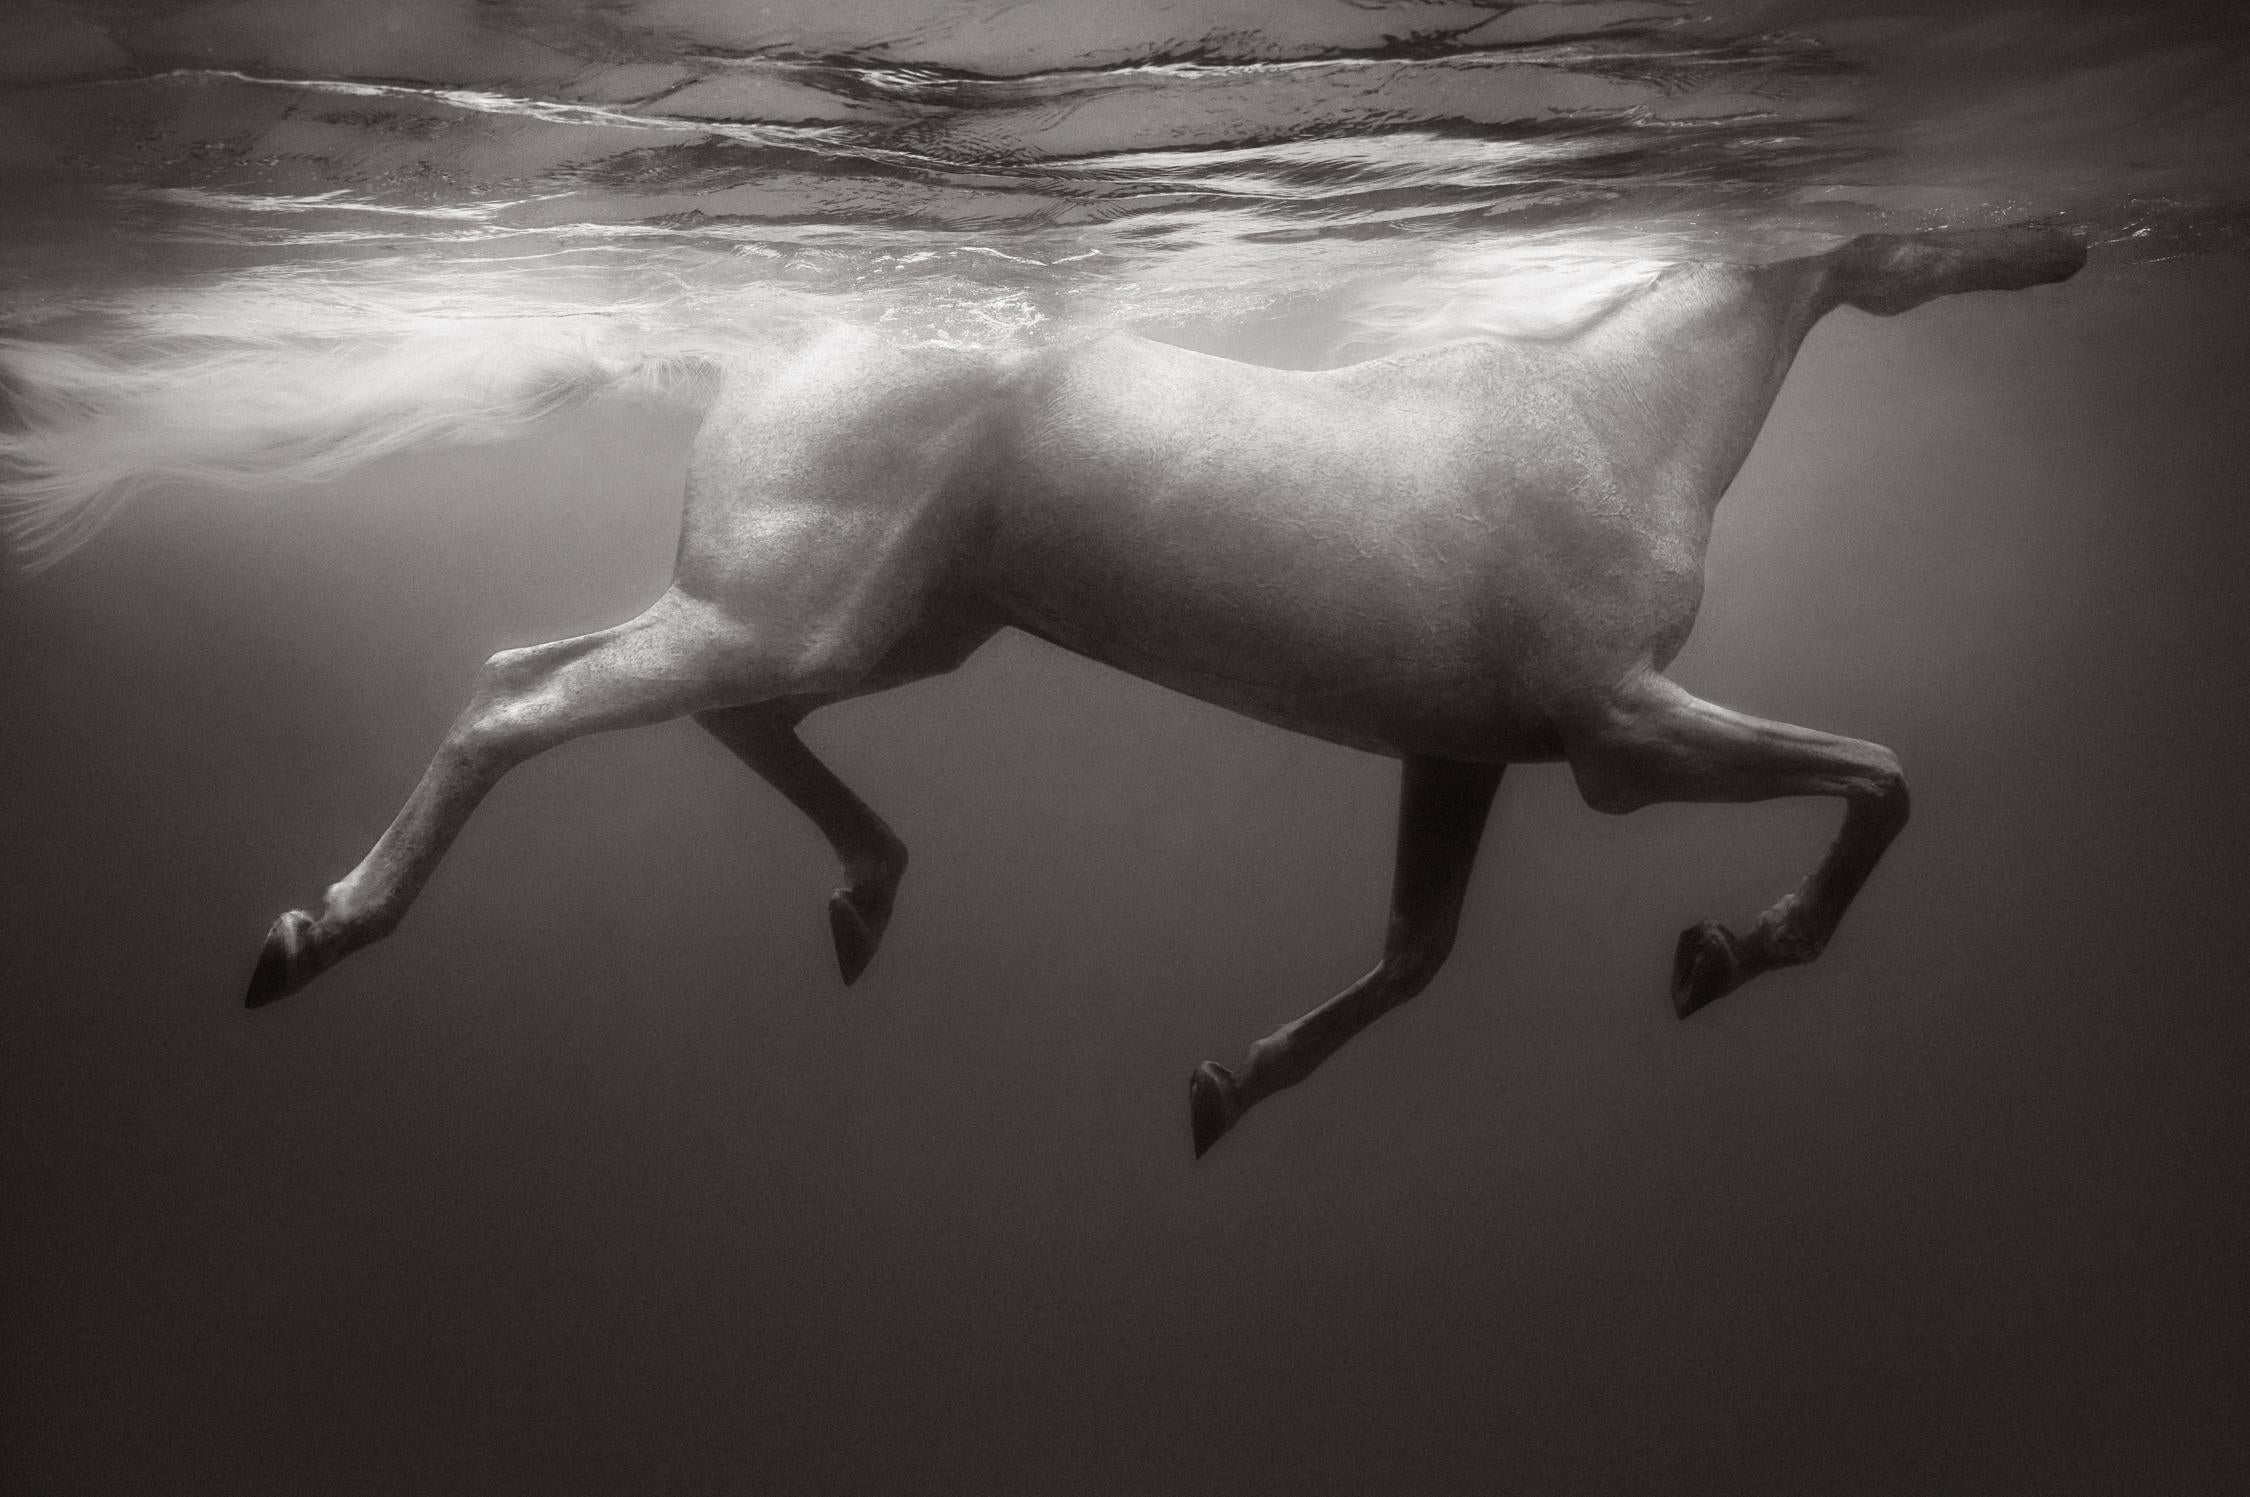 Drew Doggett Black and White Photograph - Otherworldly White Horse Swimming Underwater, Fashion-Inspired, Equestrian